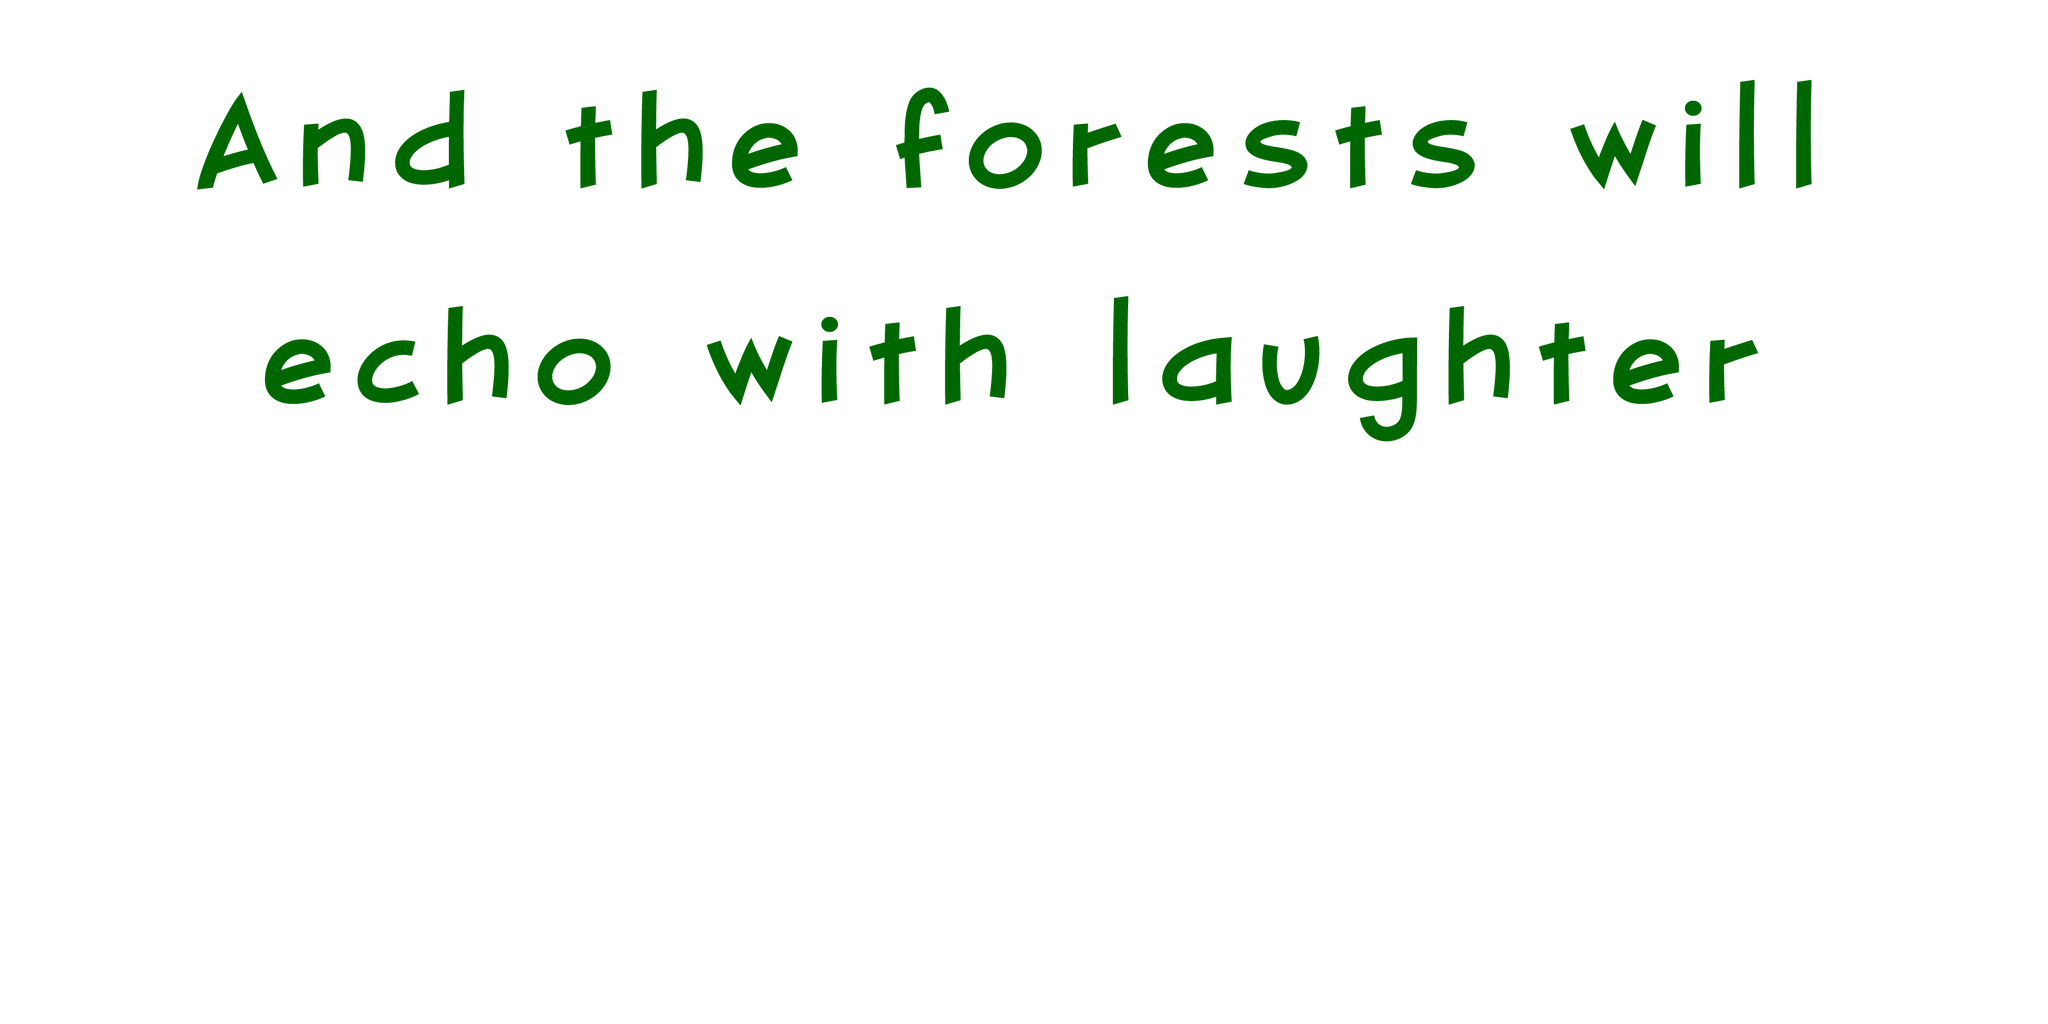 And the forests will echo with laughter